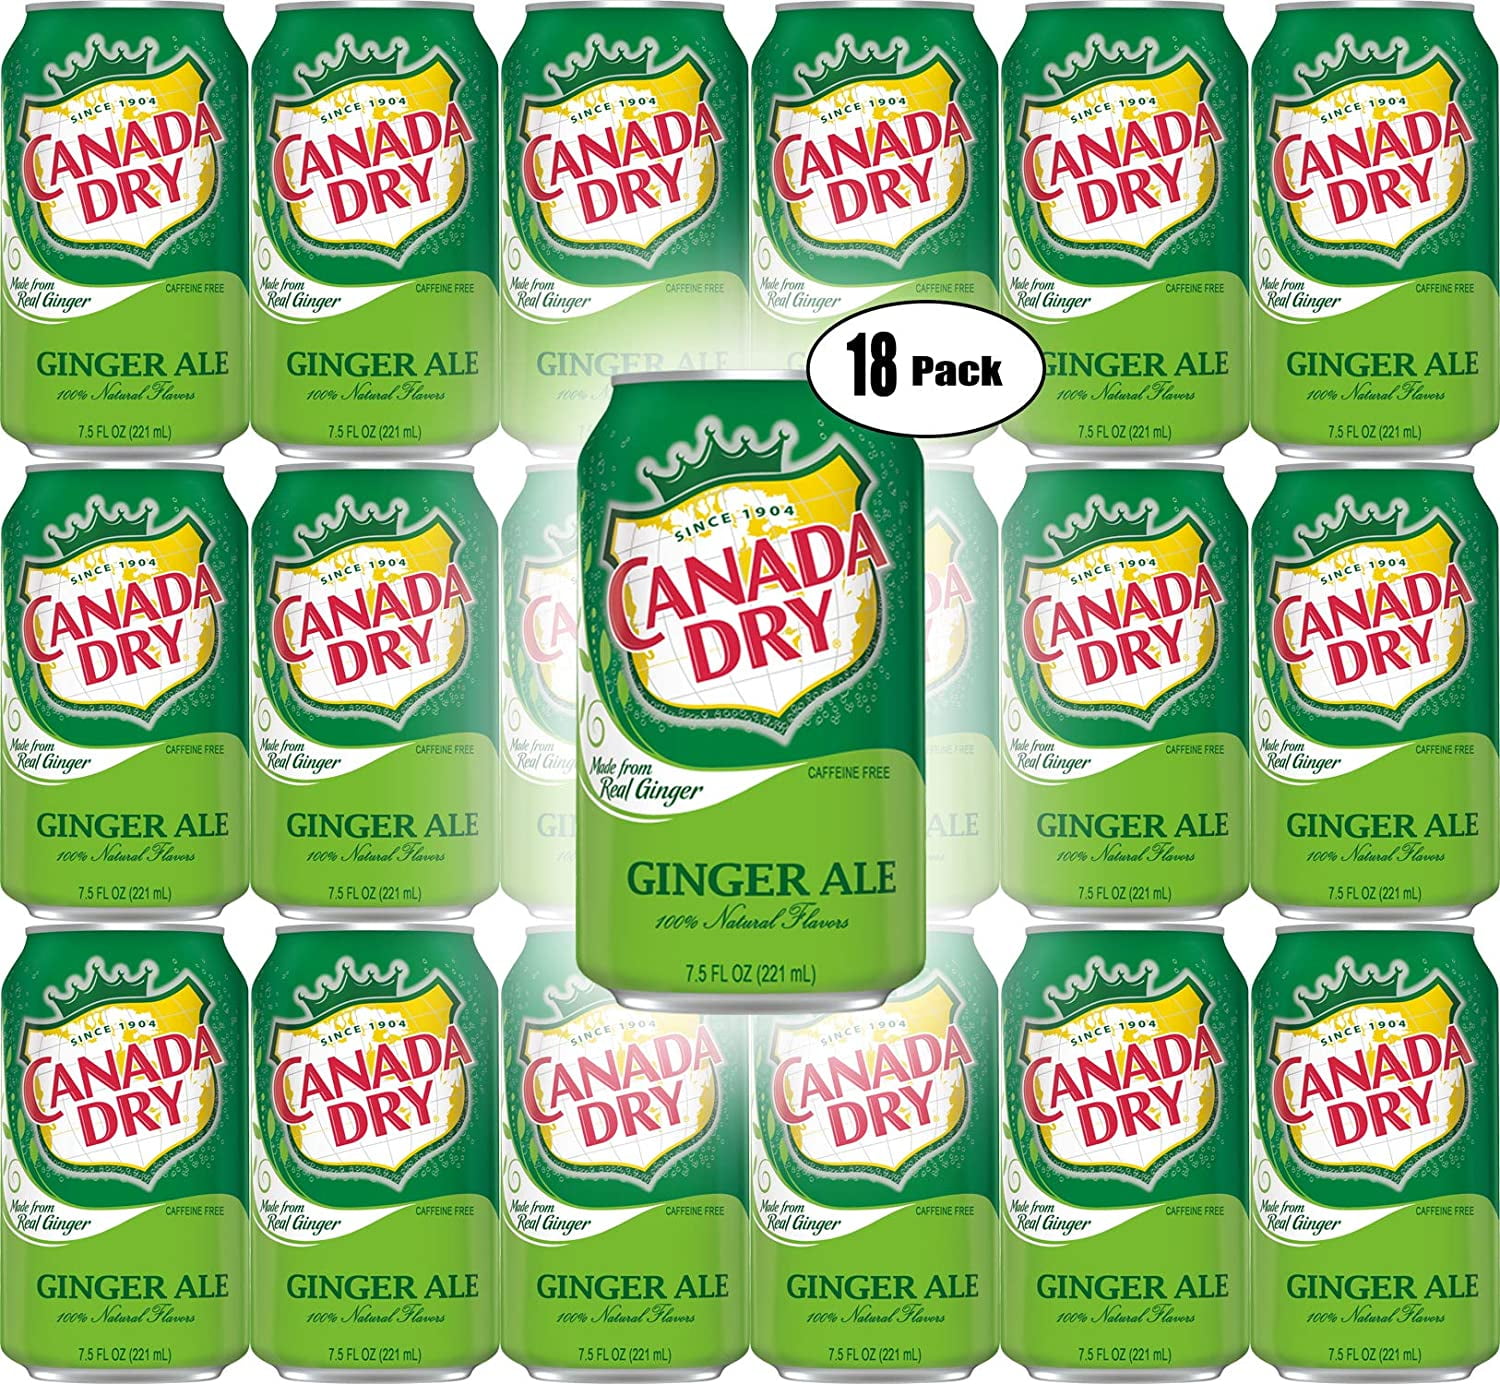 Canada Dry Ginger Ale Winter Mini Cans Variety Pack, 30 pk.